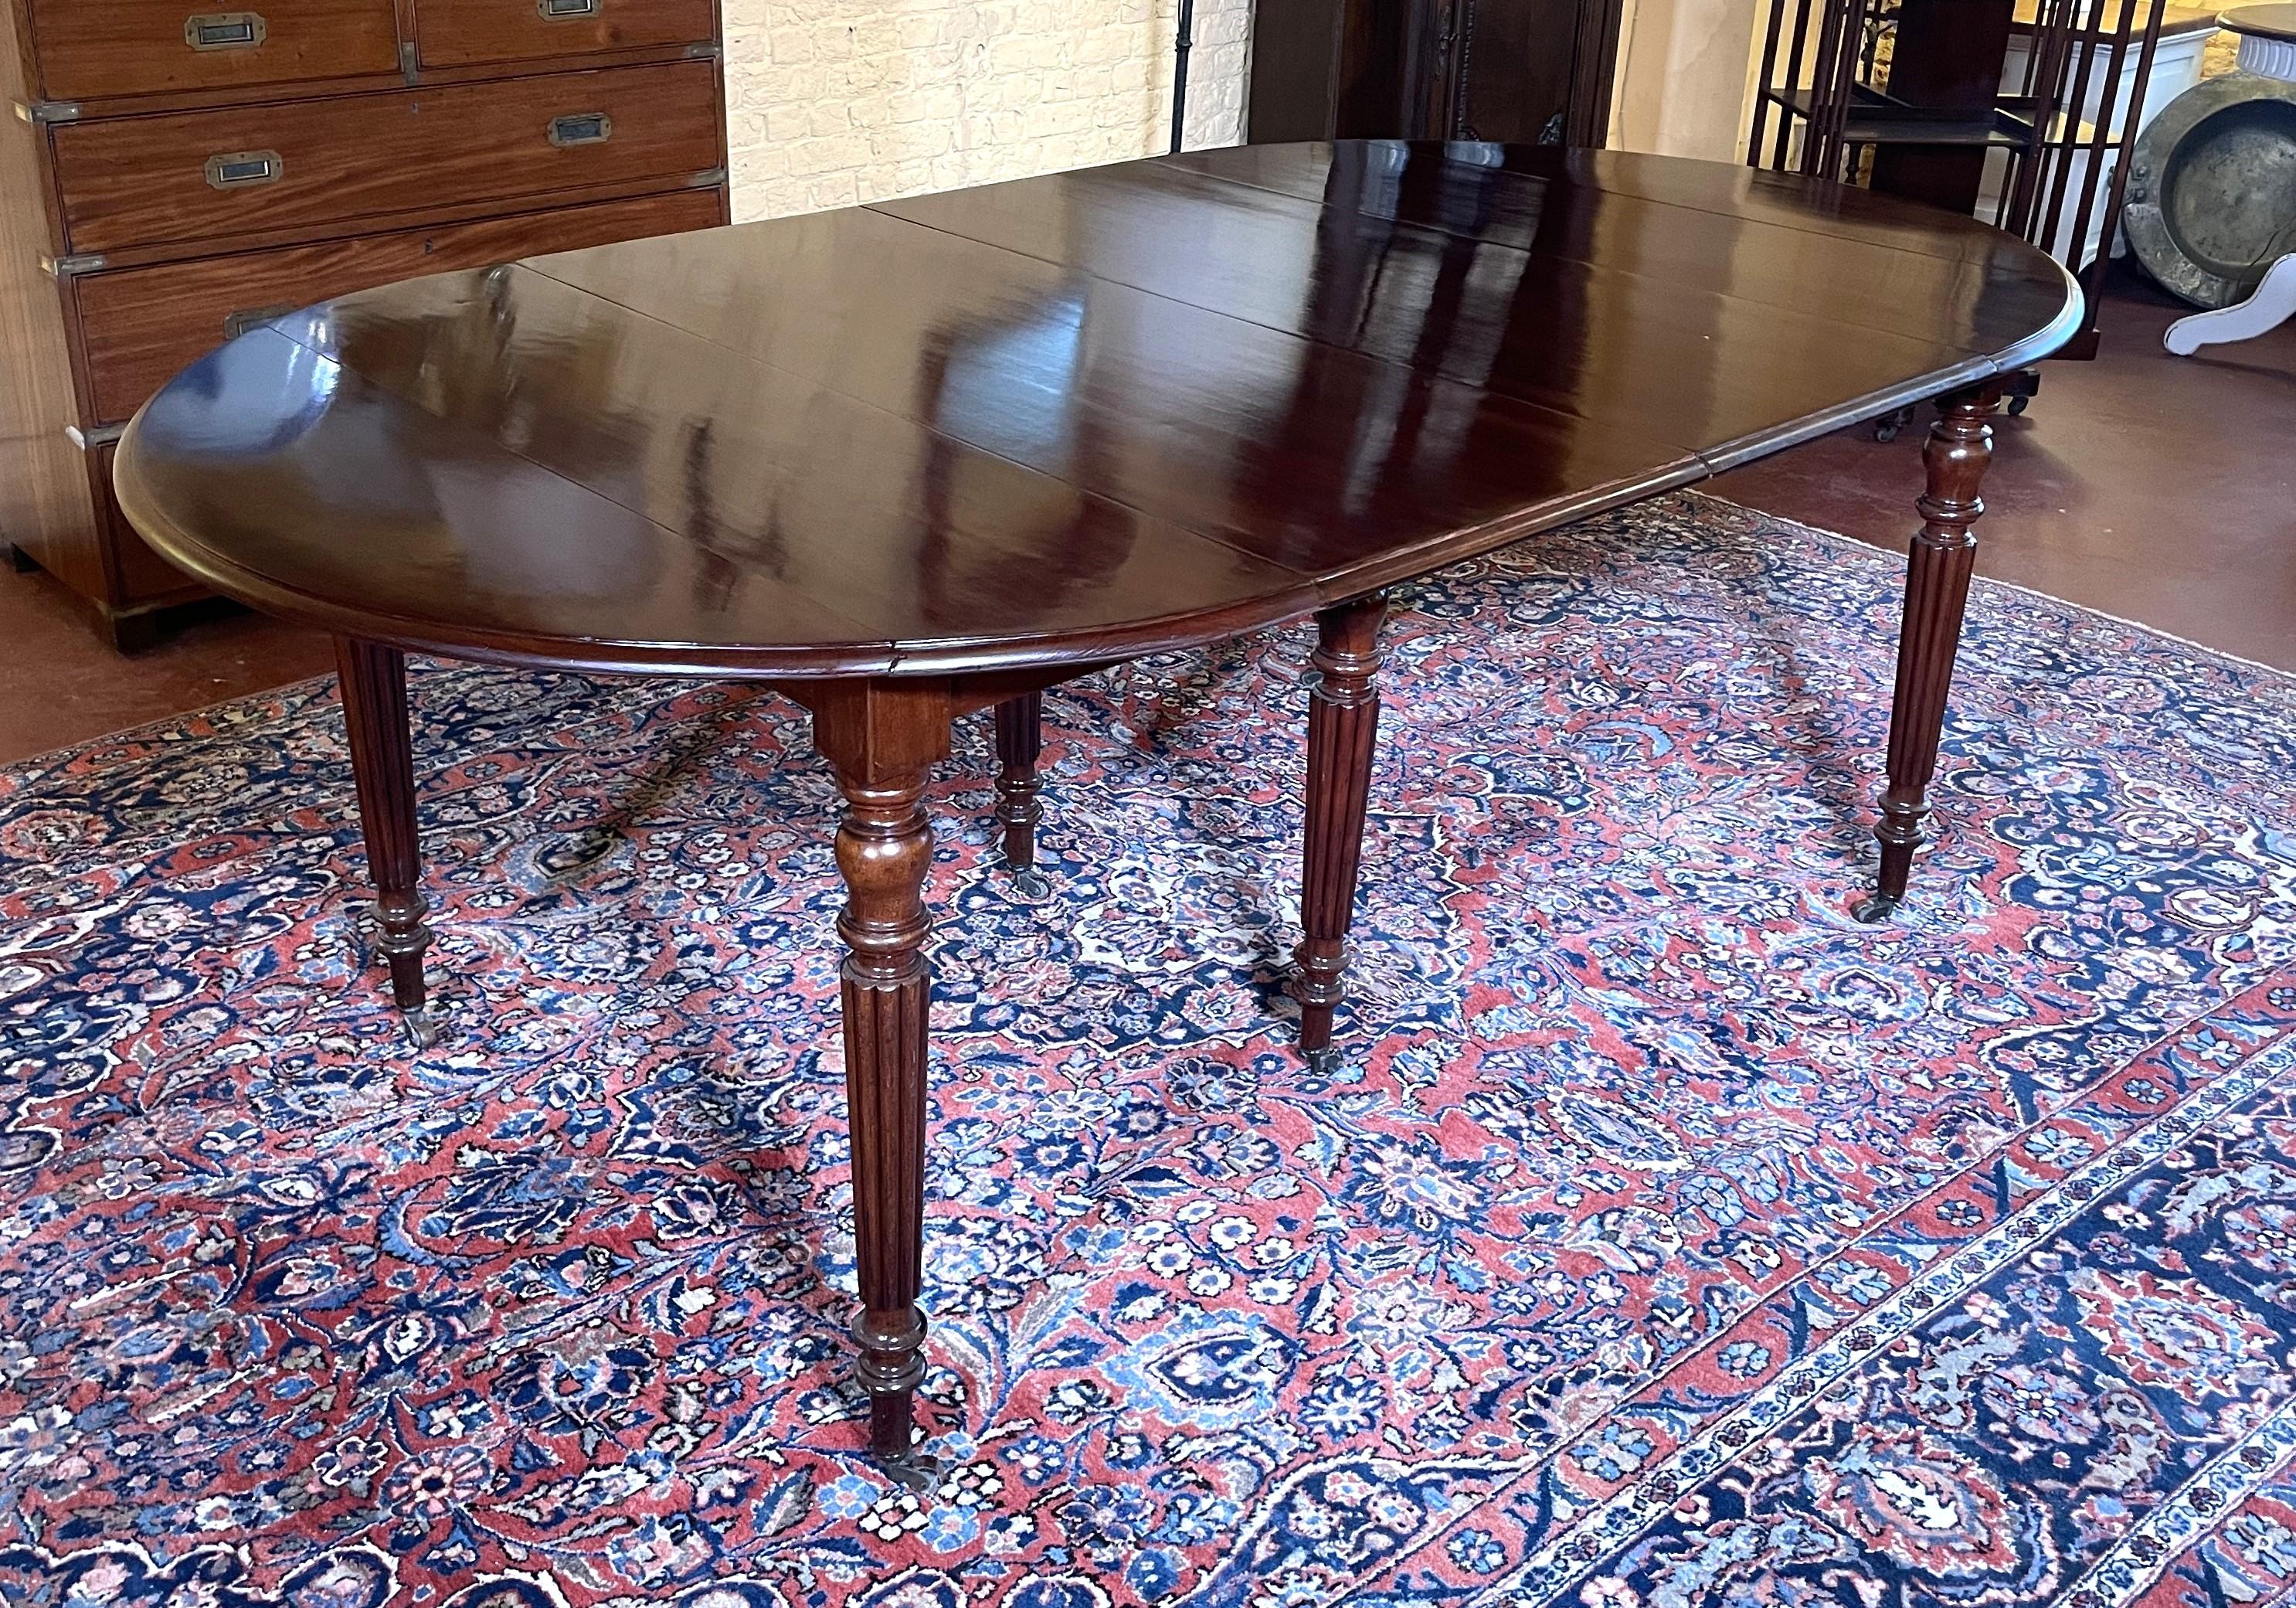 Superb 19th century dining room table in solid mahogany
Very beautiful solid mahogany top which was hand polished in our workshops with a very beautiful flame.
The table has two solid mahogany extensions in the same tone. This allows you to present